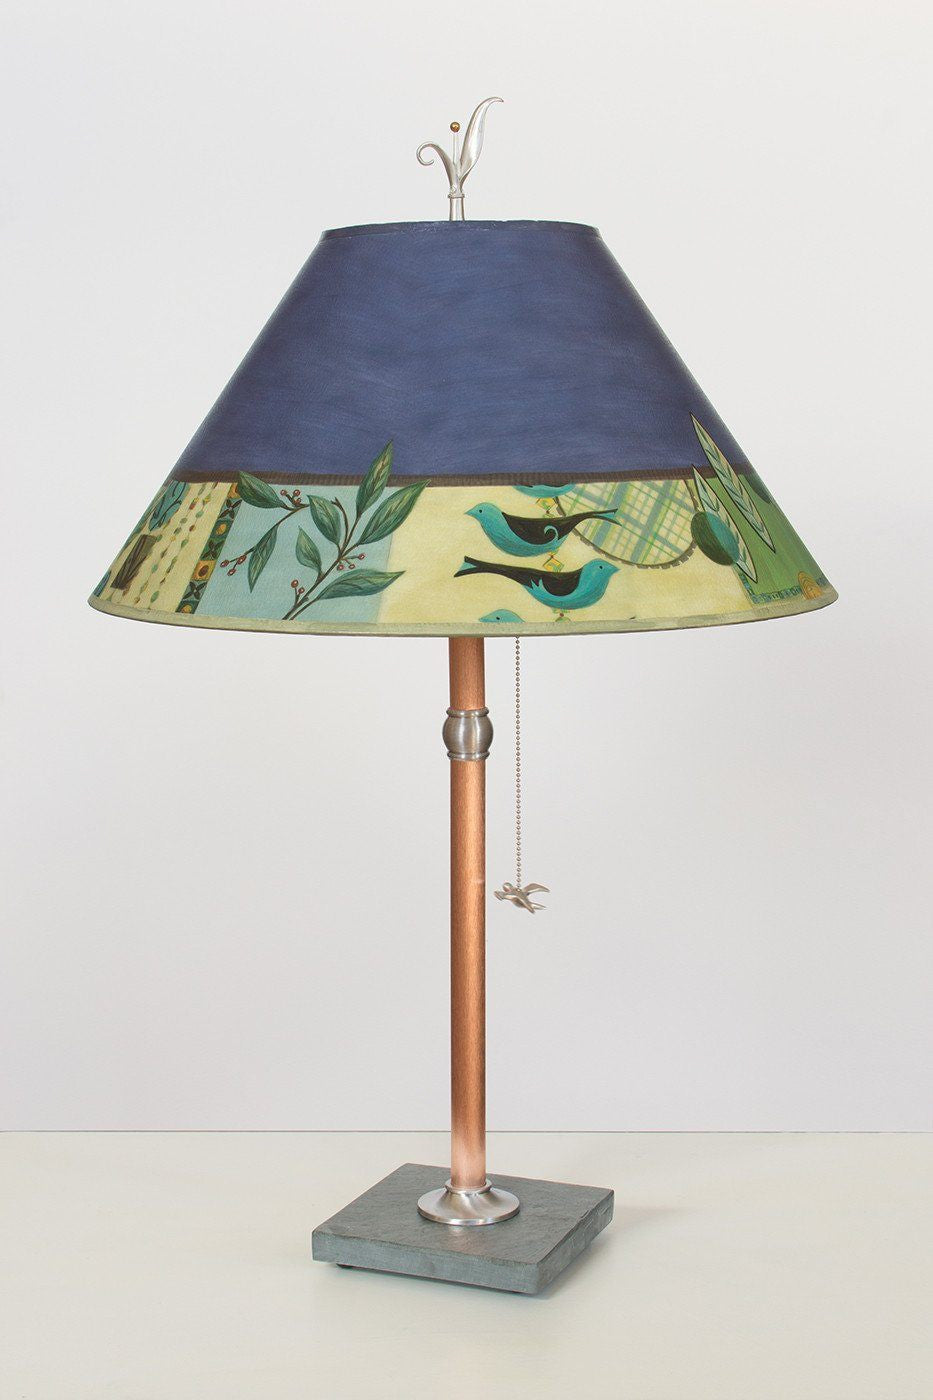 Janna Ugone & Co Table Lamps Copper Table Lamp with Large Conical Shade in New Capri Periwinkle